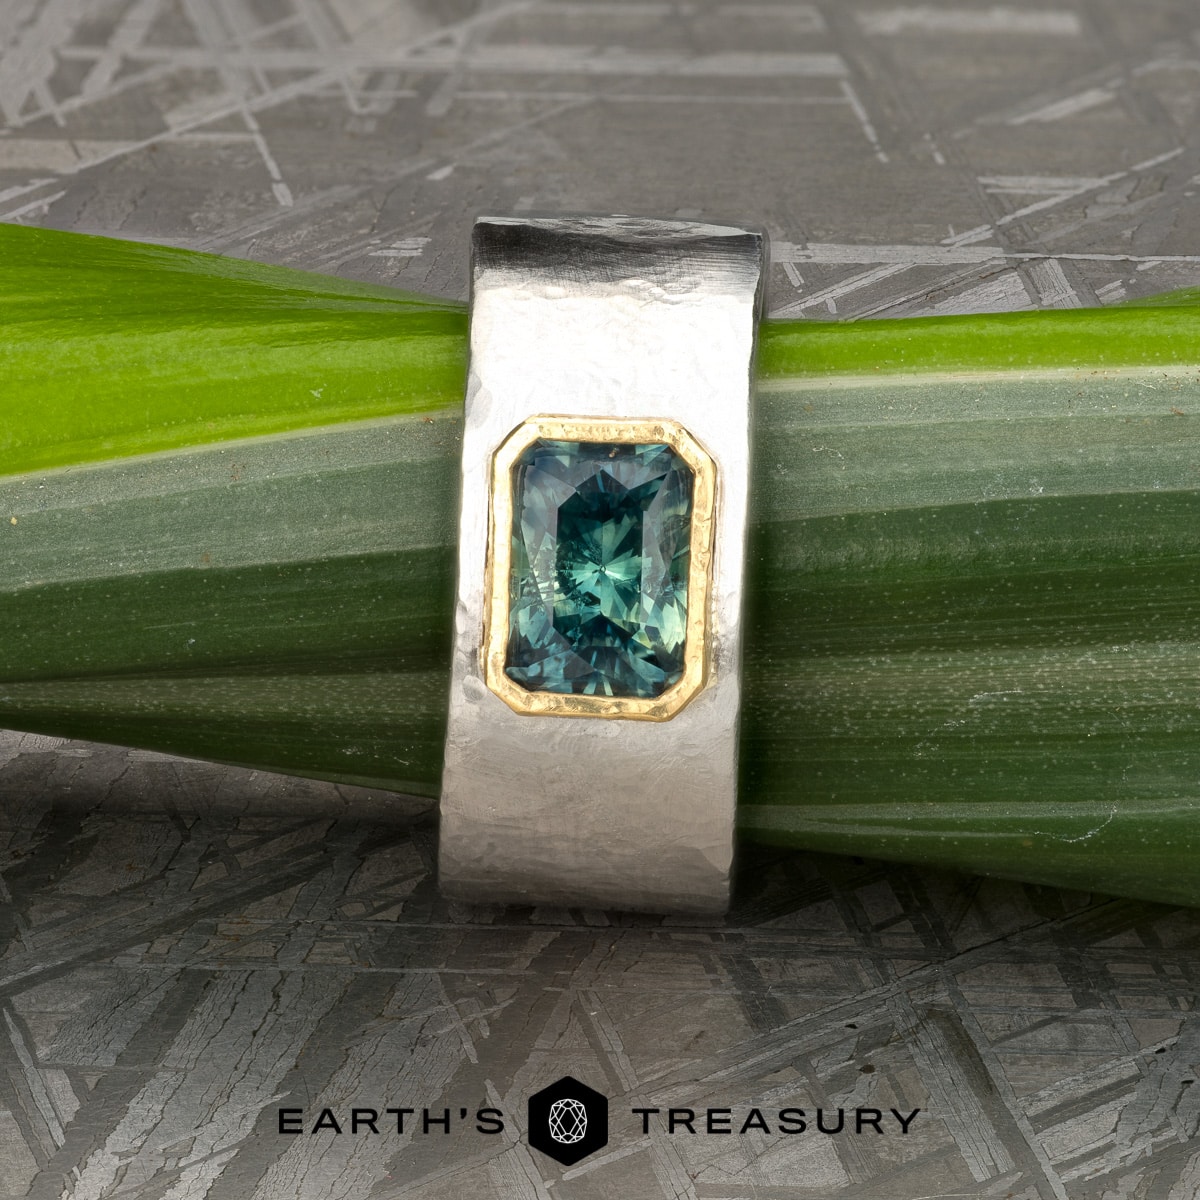 The "Clint" in platinum and 18k yellow gold with 2.59-carat Montana sapphire